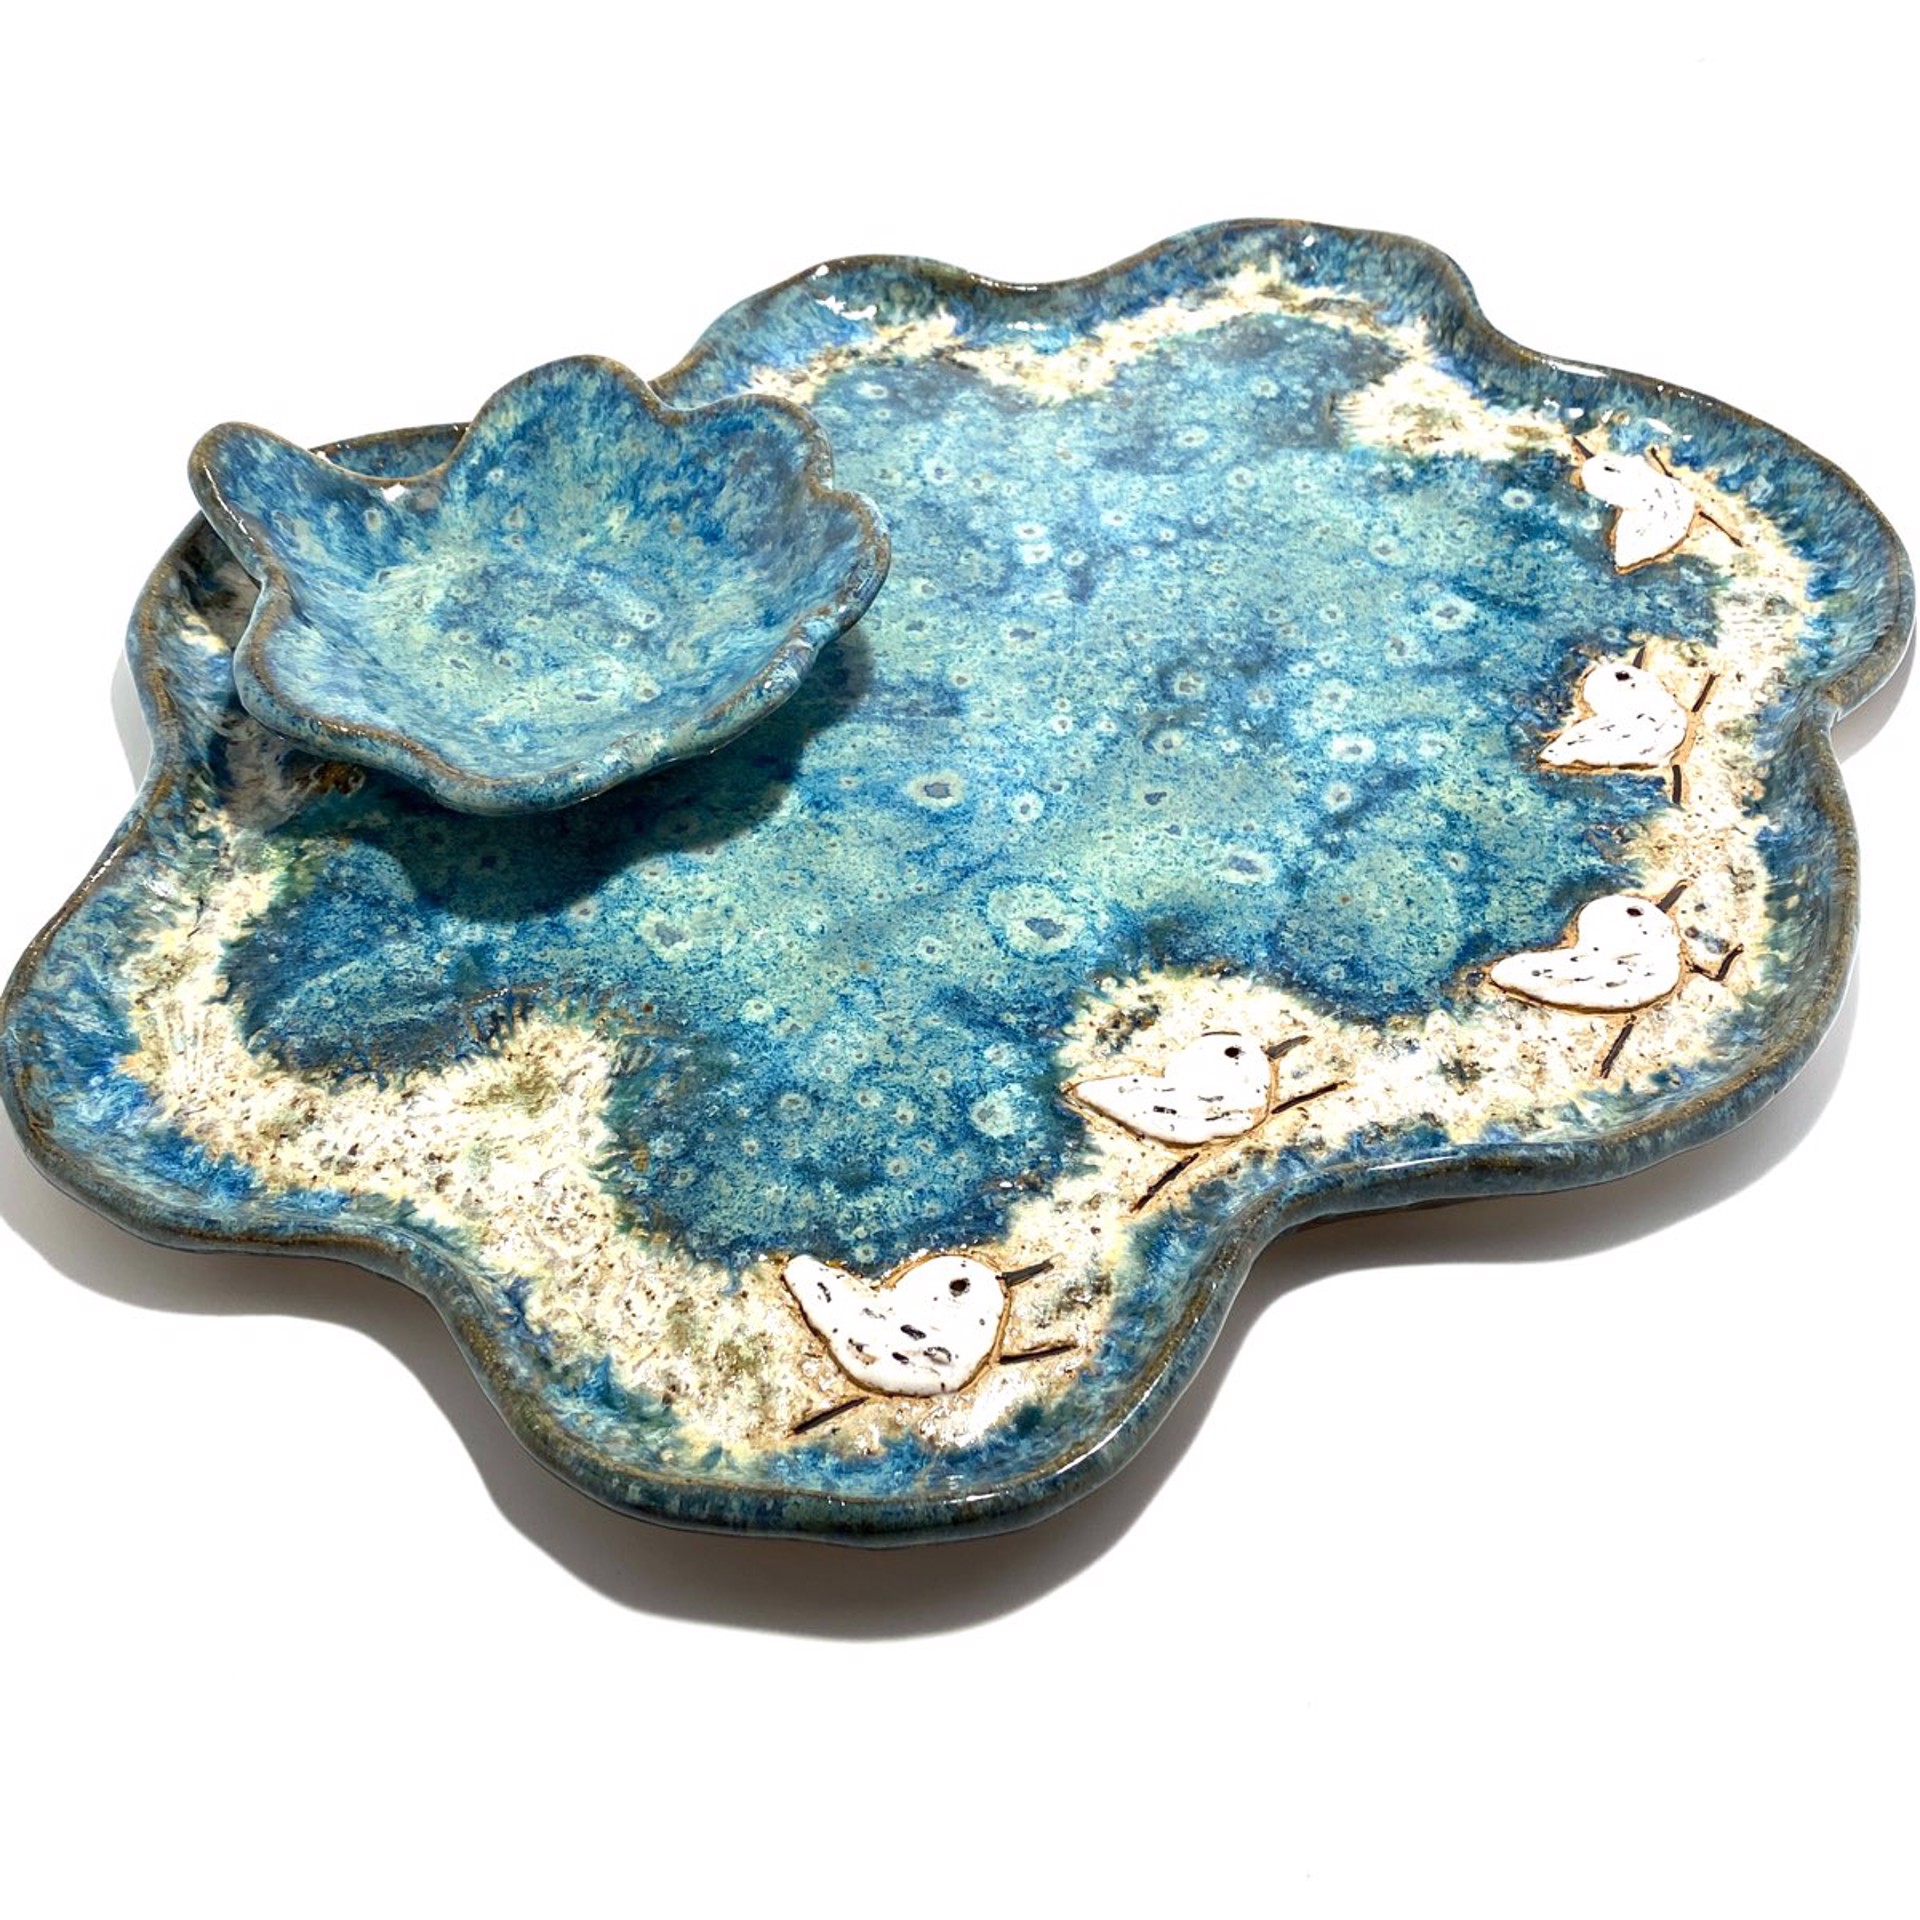 Chip and Dip with Five Sandpipers (Blue Glaze) LG23-1112 by Jim & Steffi Logan